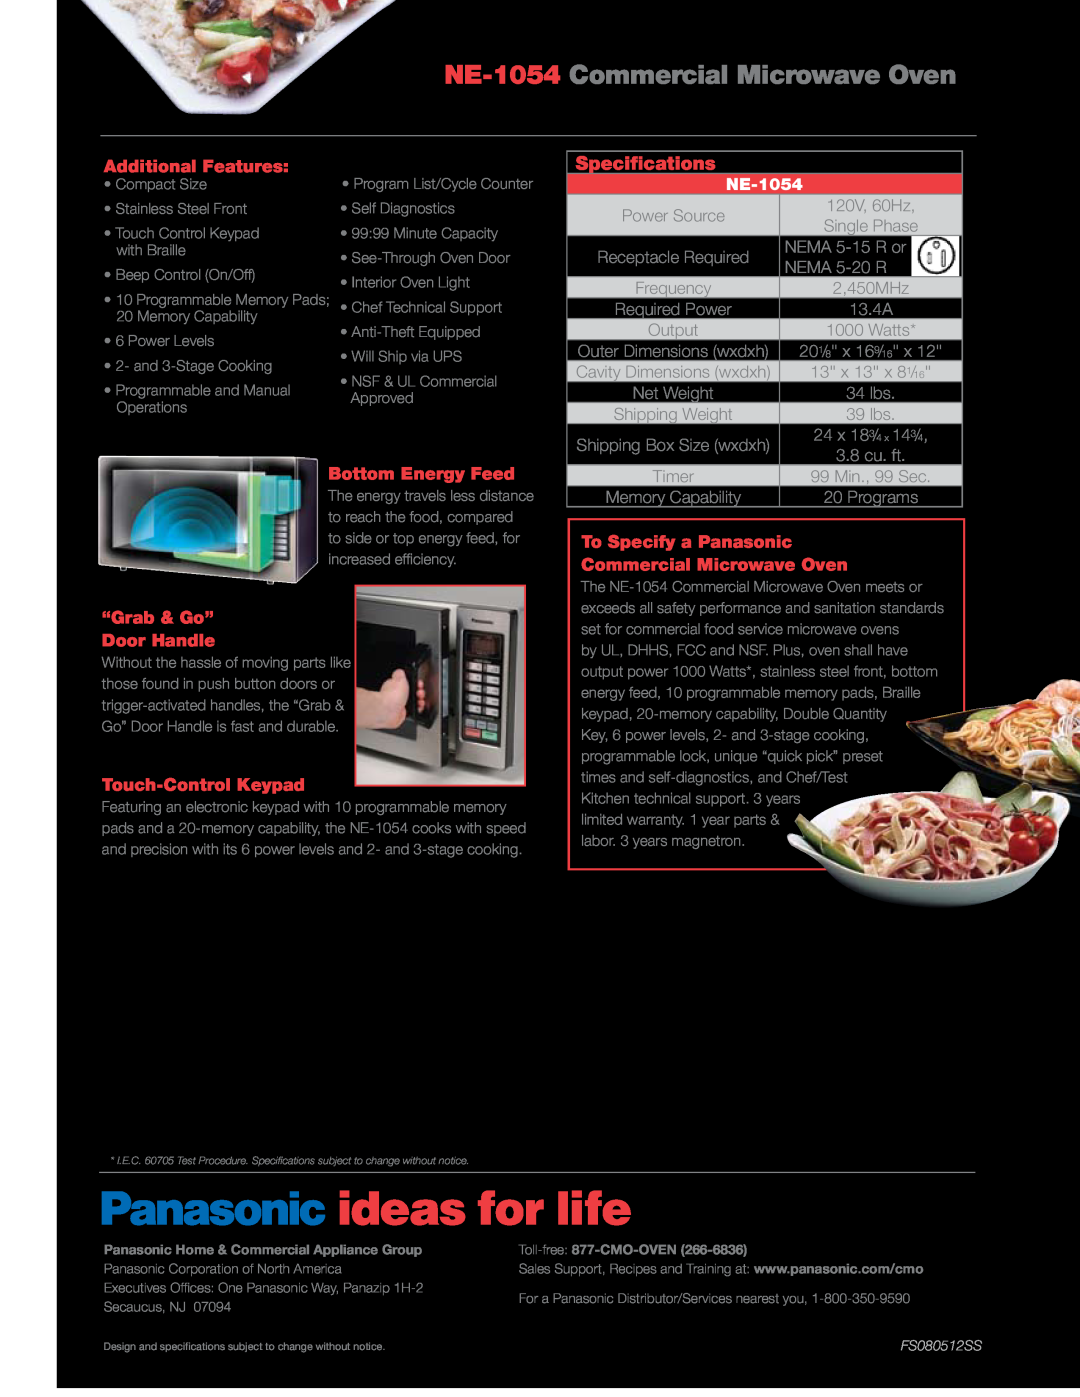 Panasonic NE-1054 Commercial Microwave Oven, Specifications, Additional Features, “Grab & Go” Door Handle, Power Source 